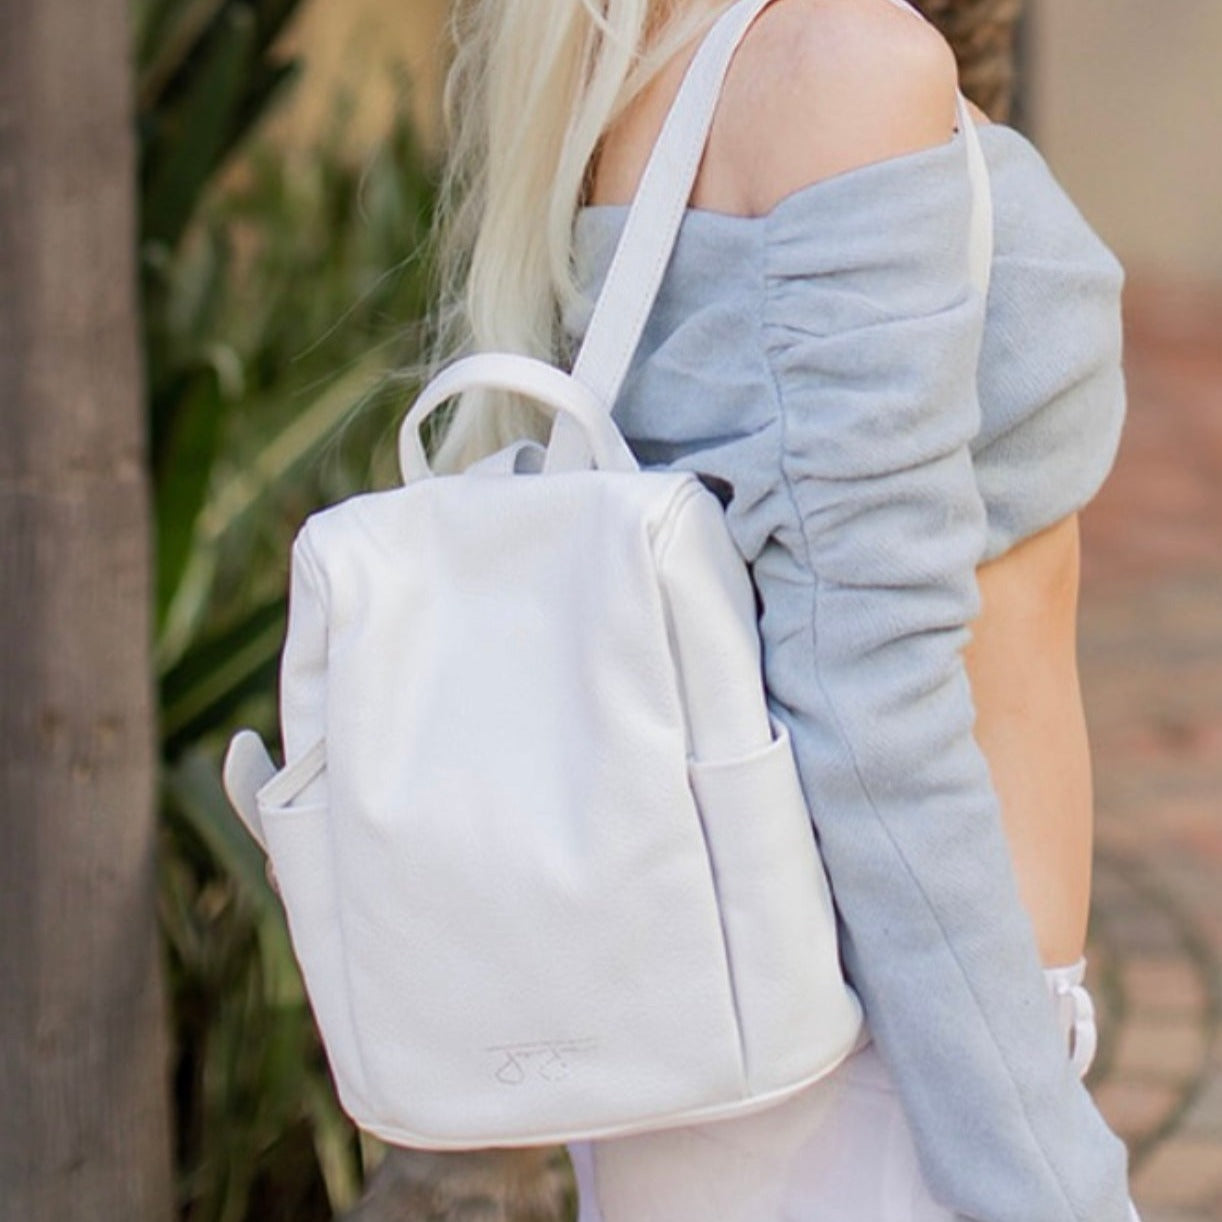 Exquisite Mini Backpack White